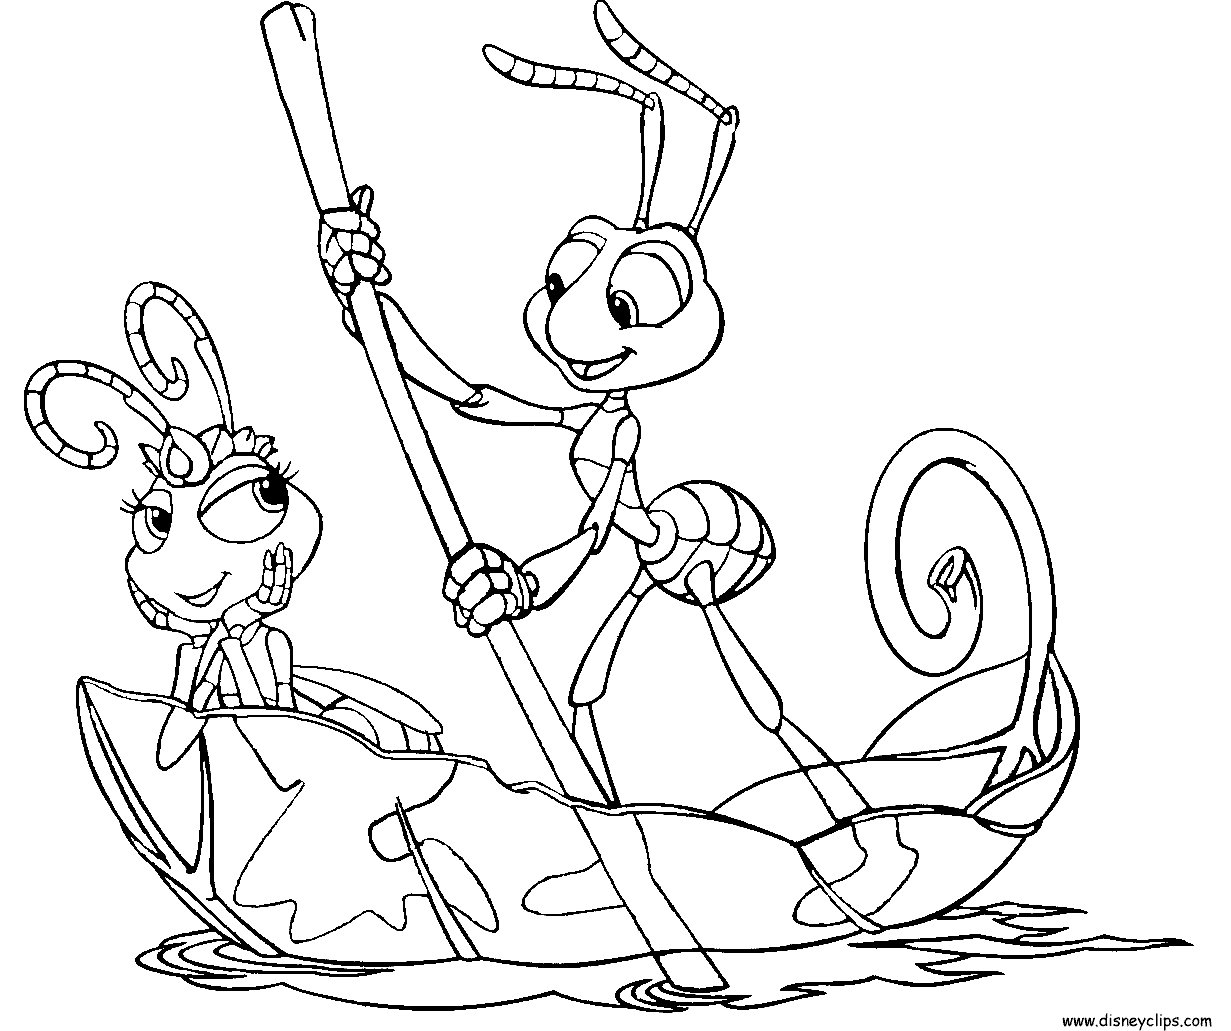 A Bug’s Life Coloring Page